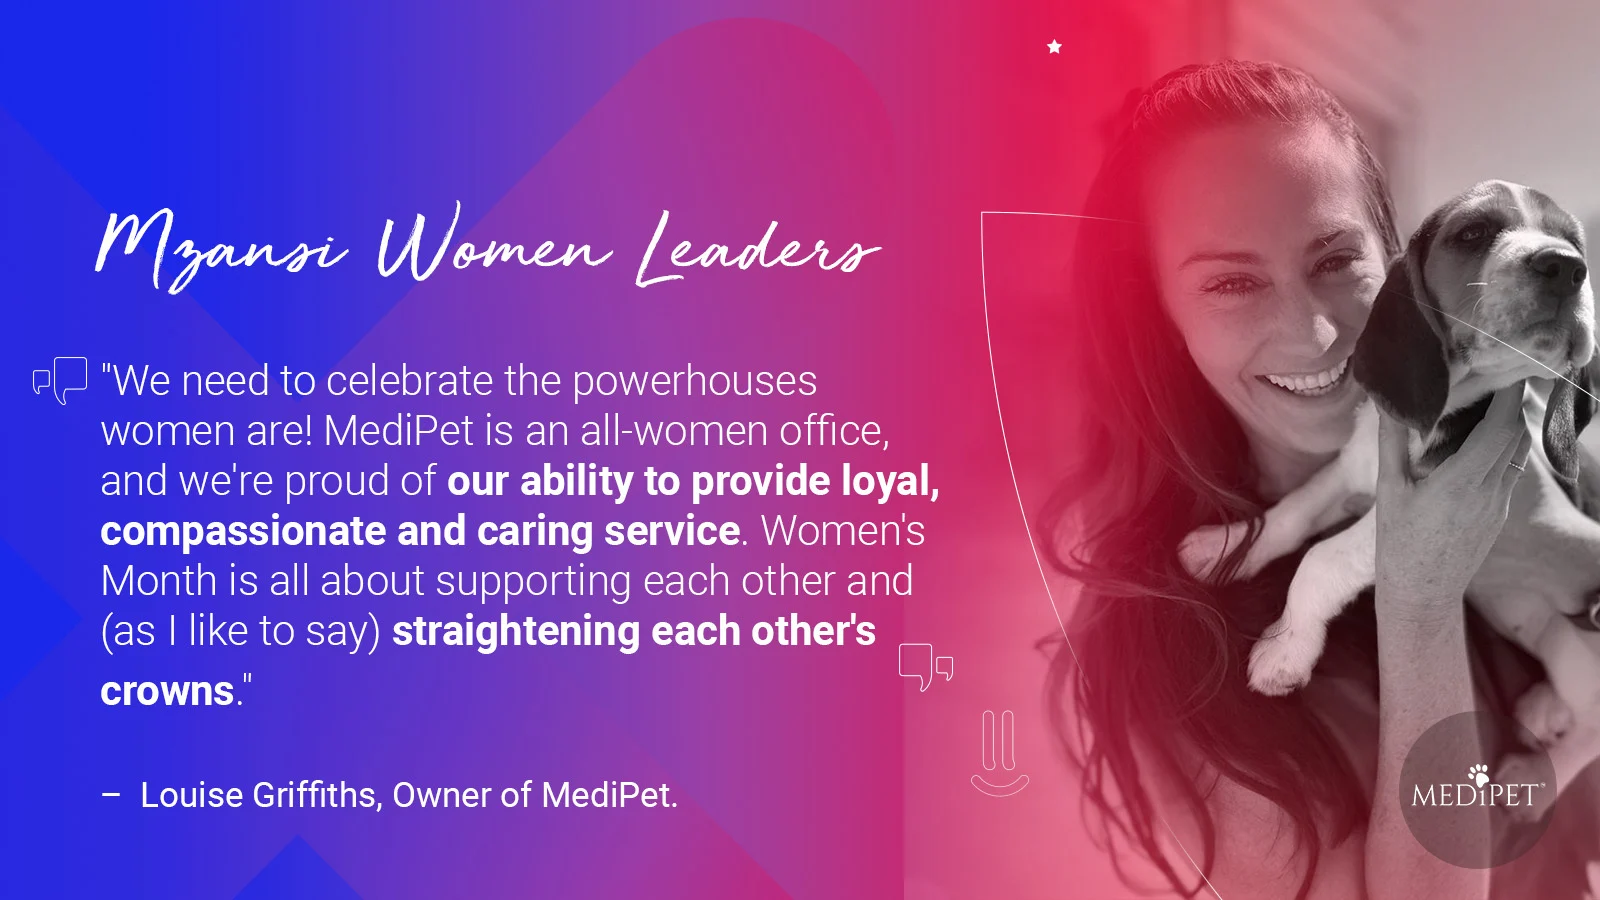 Interview with Louise Griffiths, Founder of MediPet: